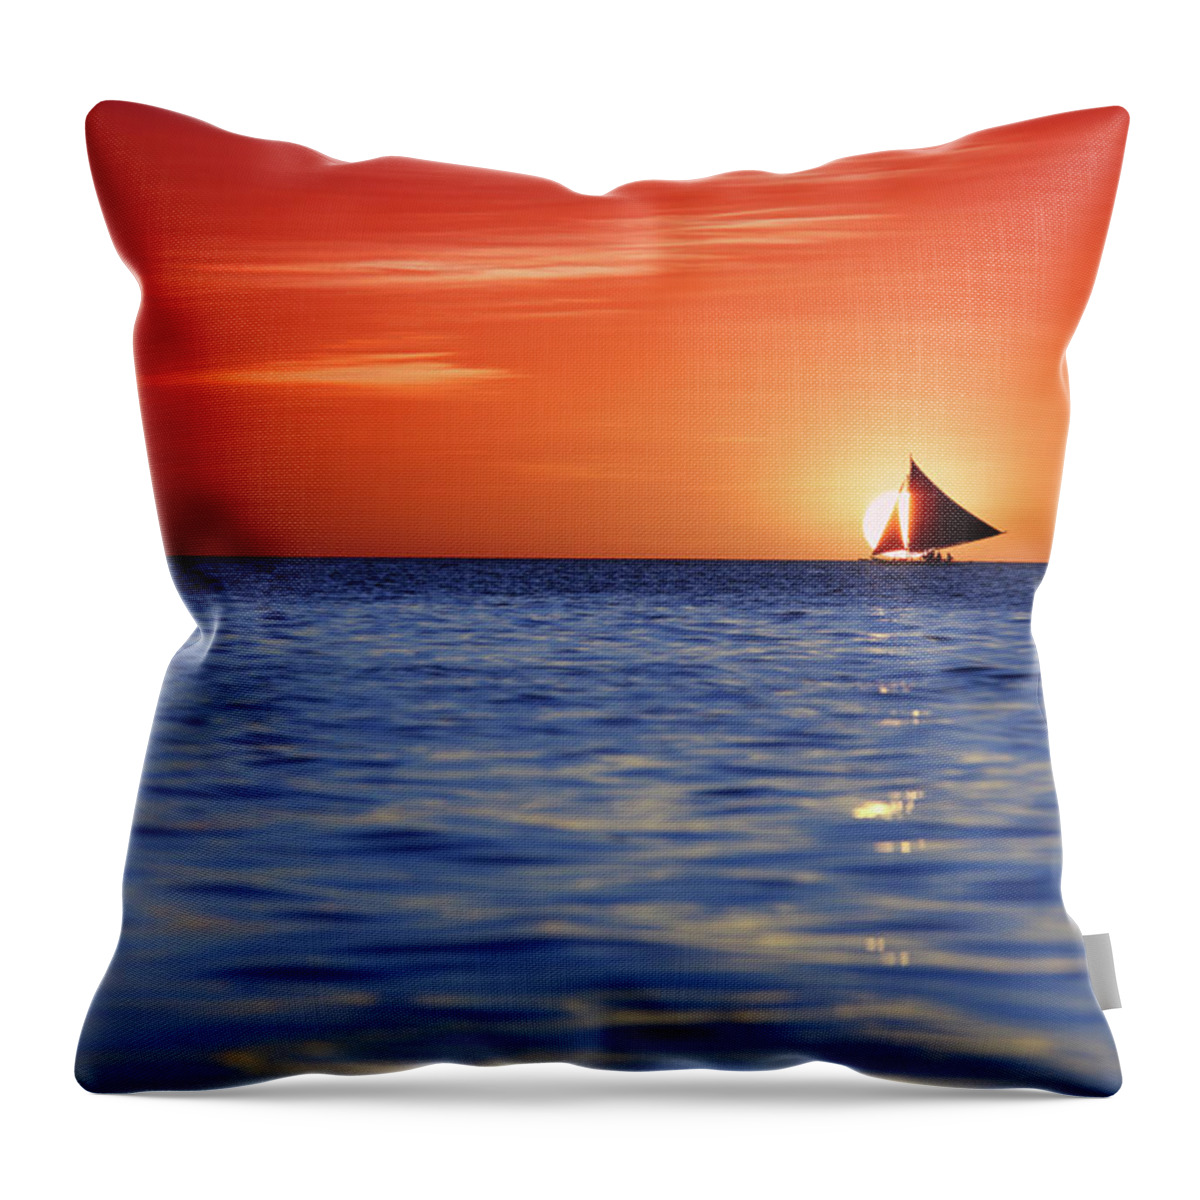 Scenics Throw Pillow featuring the photograph Red Sunset by Vuk8691